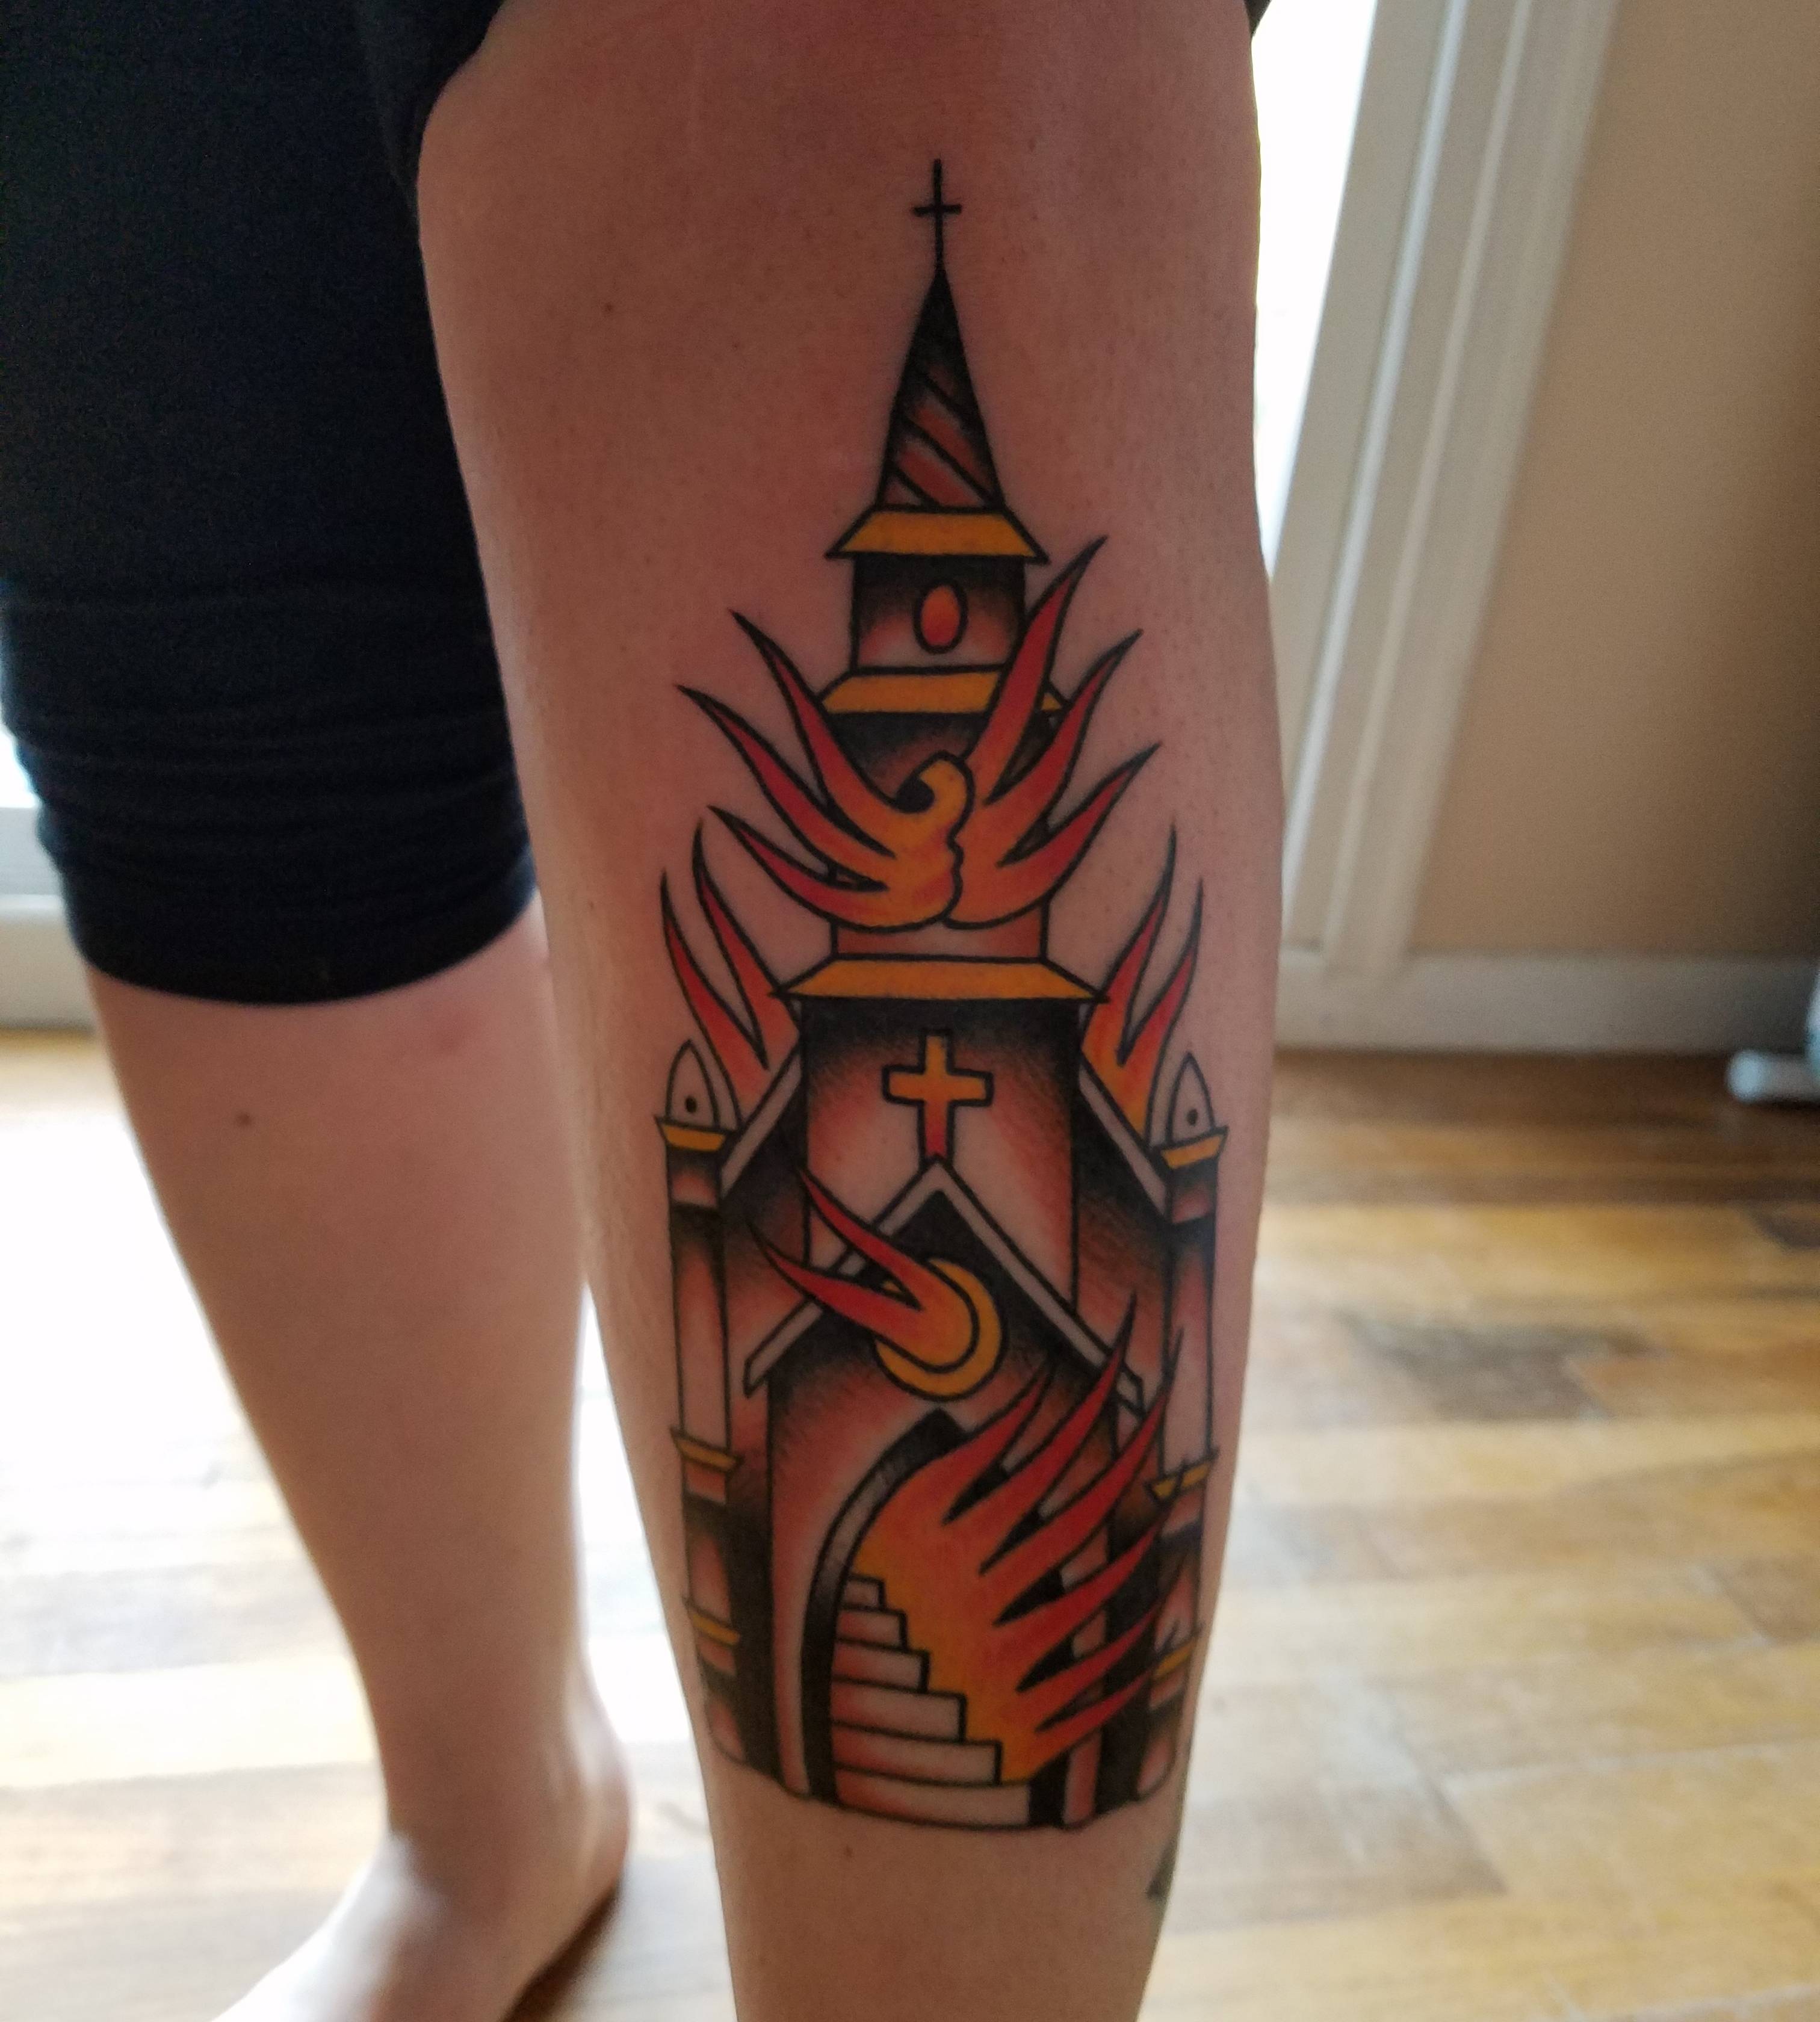 Burning Church done by Justin Hofmeister at Electric Anchor on Market St.  in Parkersburg, WV. : r/tattoo